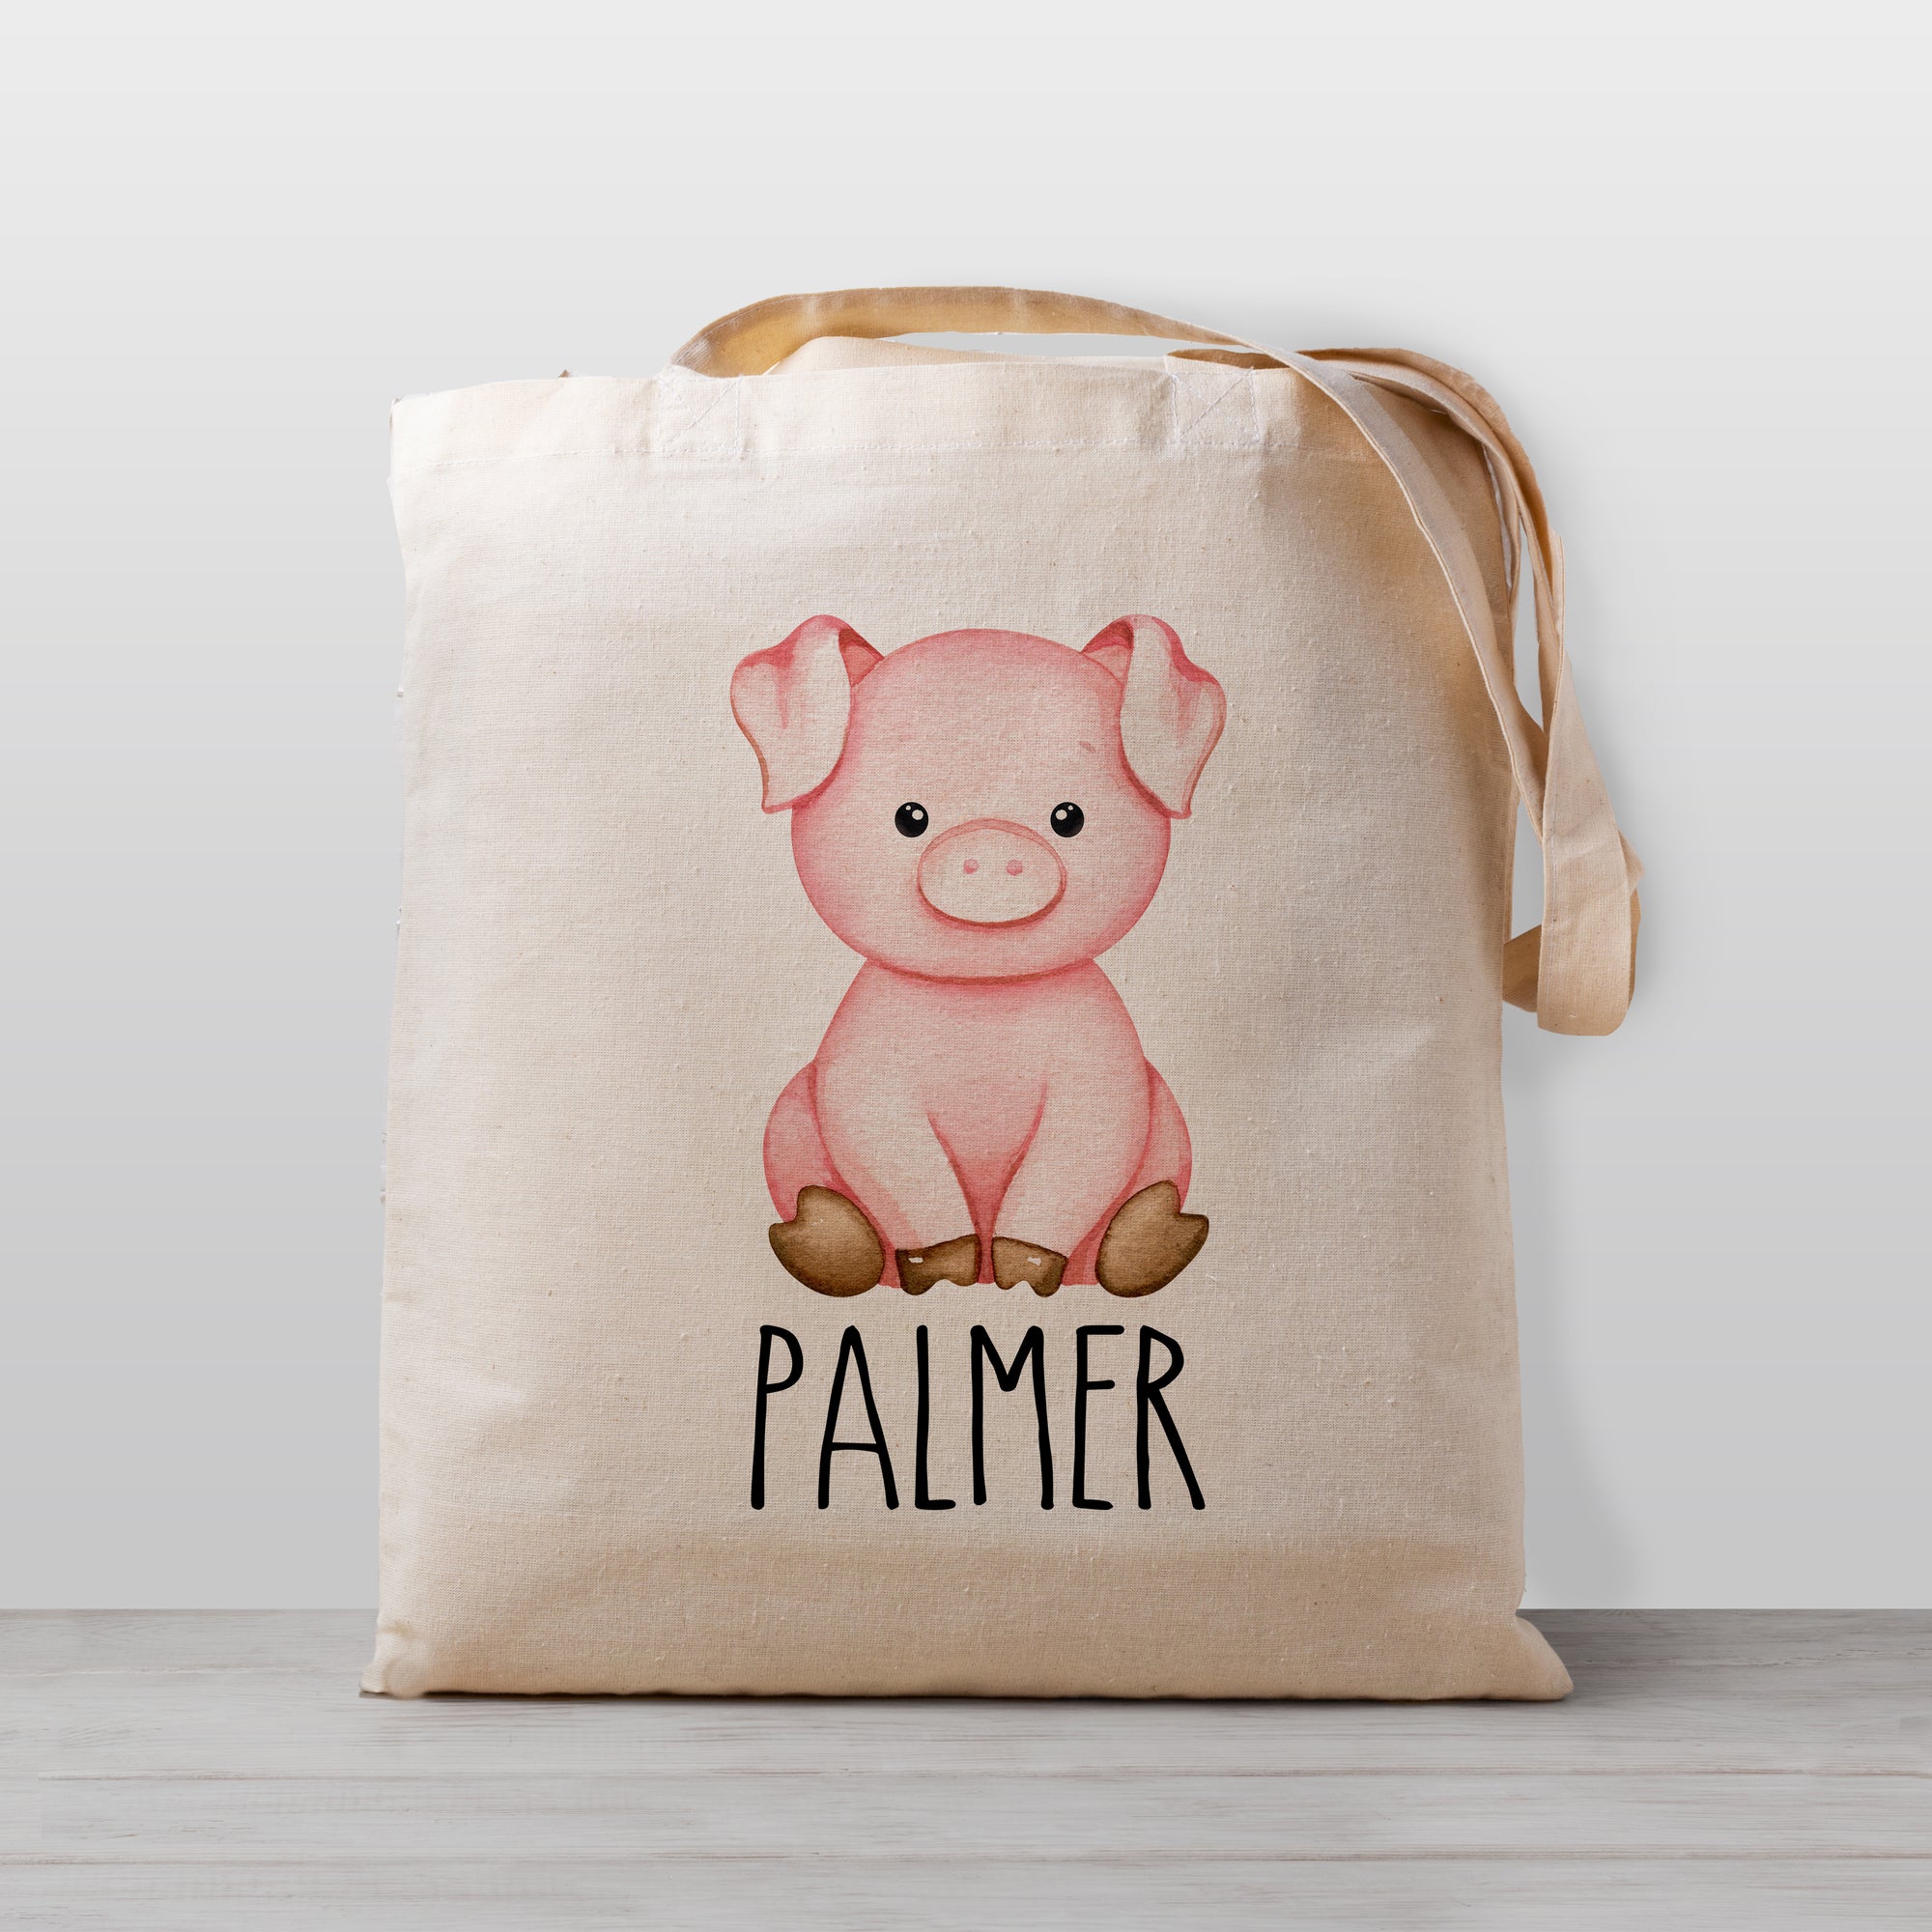 Pig Personalized Tote Bag, with your kid's name, gender neutral so perfect for a boy or a girl, printed on 100% natural cotton canvas. Perfect for preschool, daycare, or library books